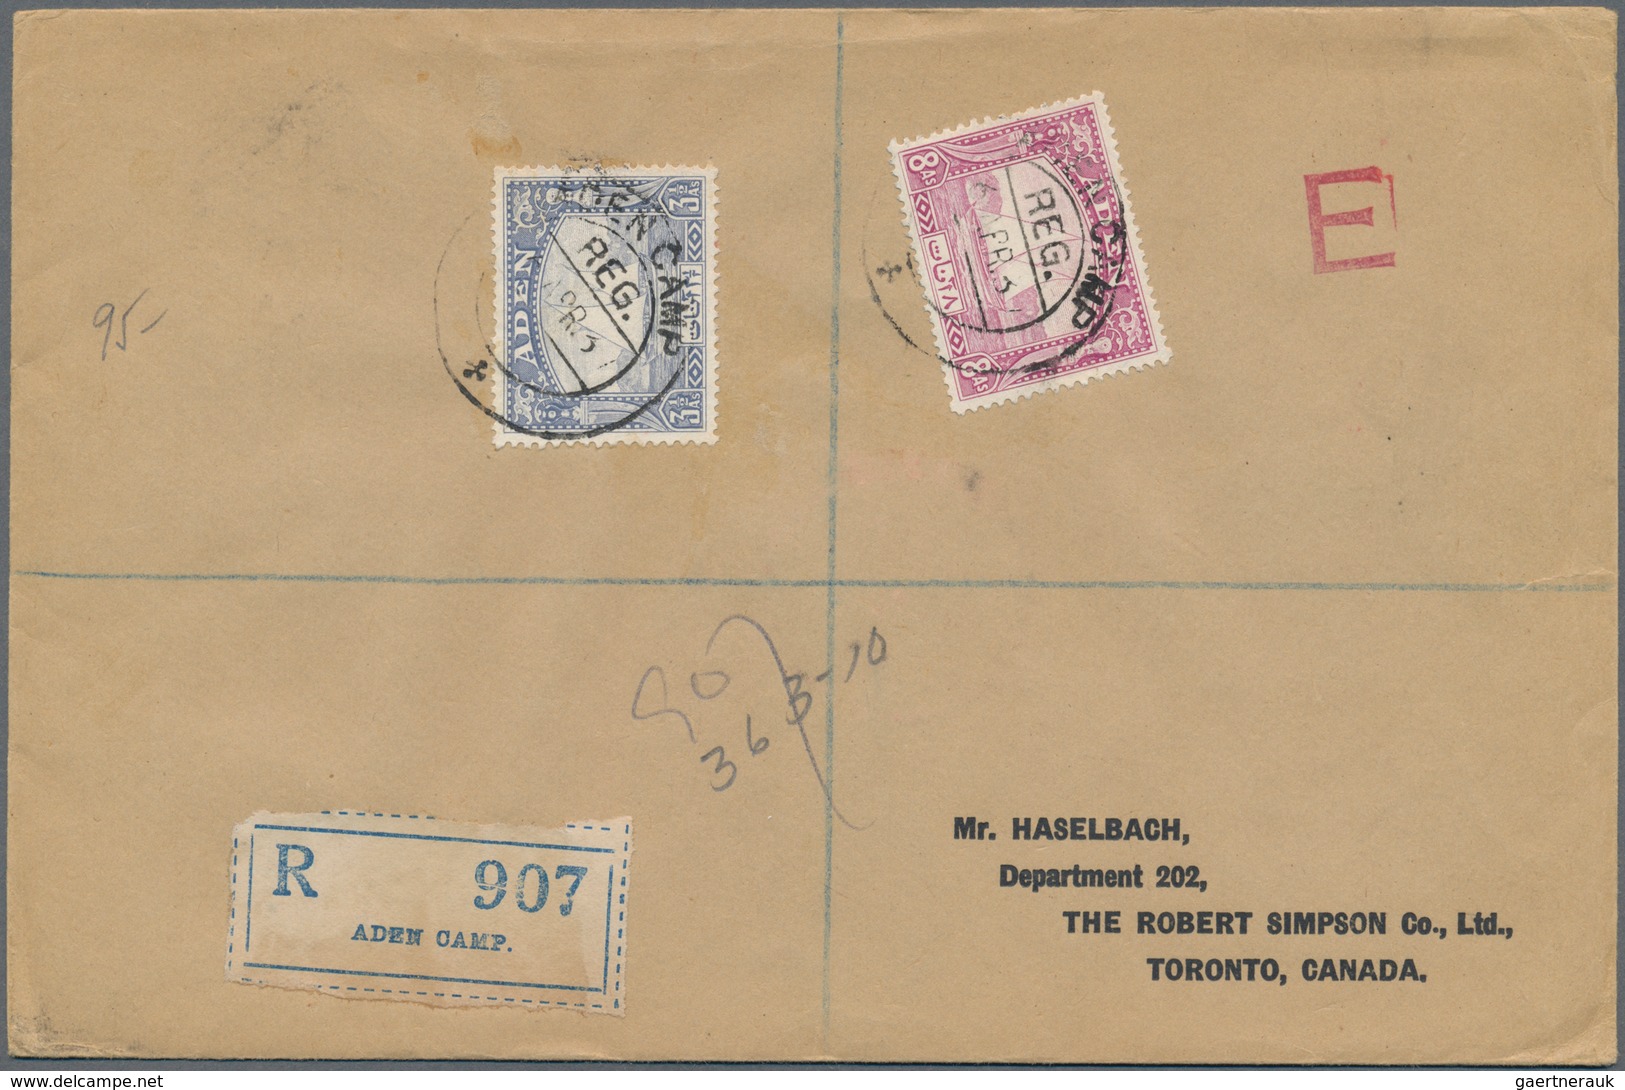 08005 Aden: 1937 Registered Cover From Aden-Camp To Toronto, CANADA Franked By Dhows 3½a. And 8a. Tied By - Yemen